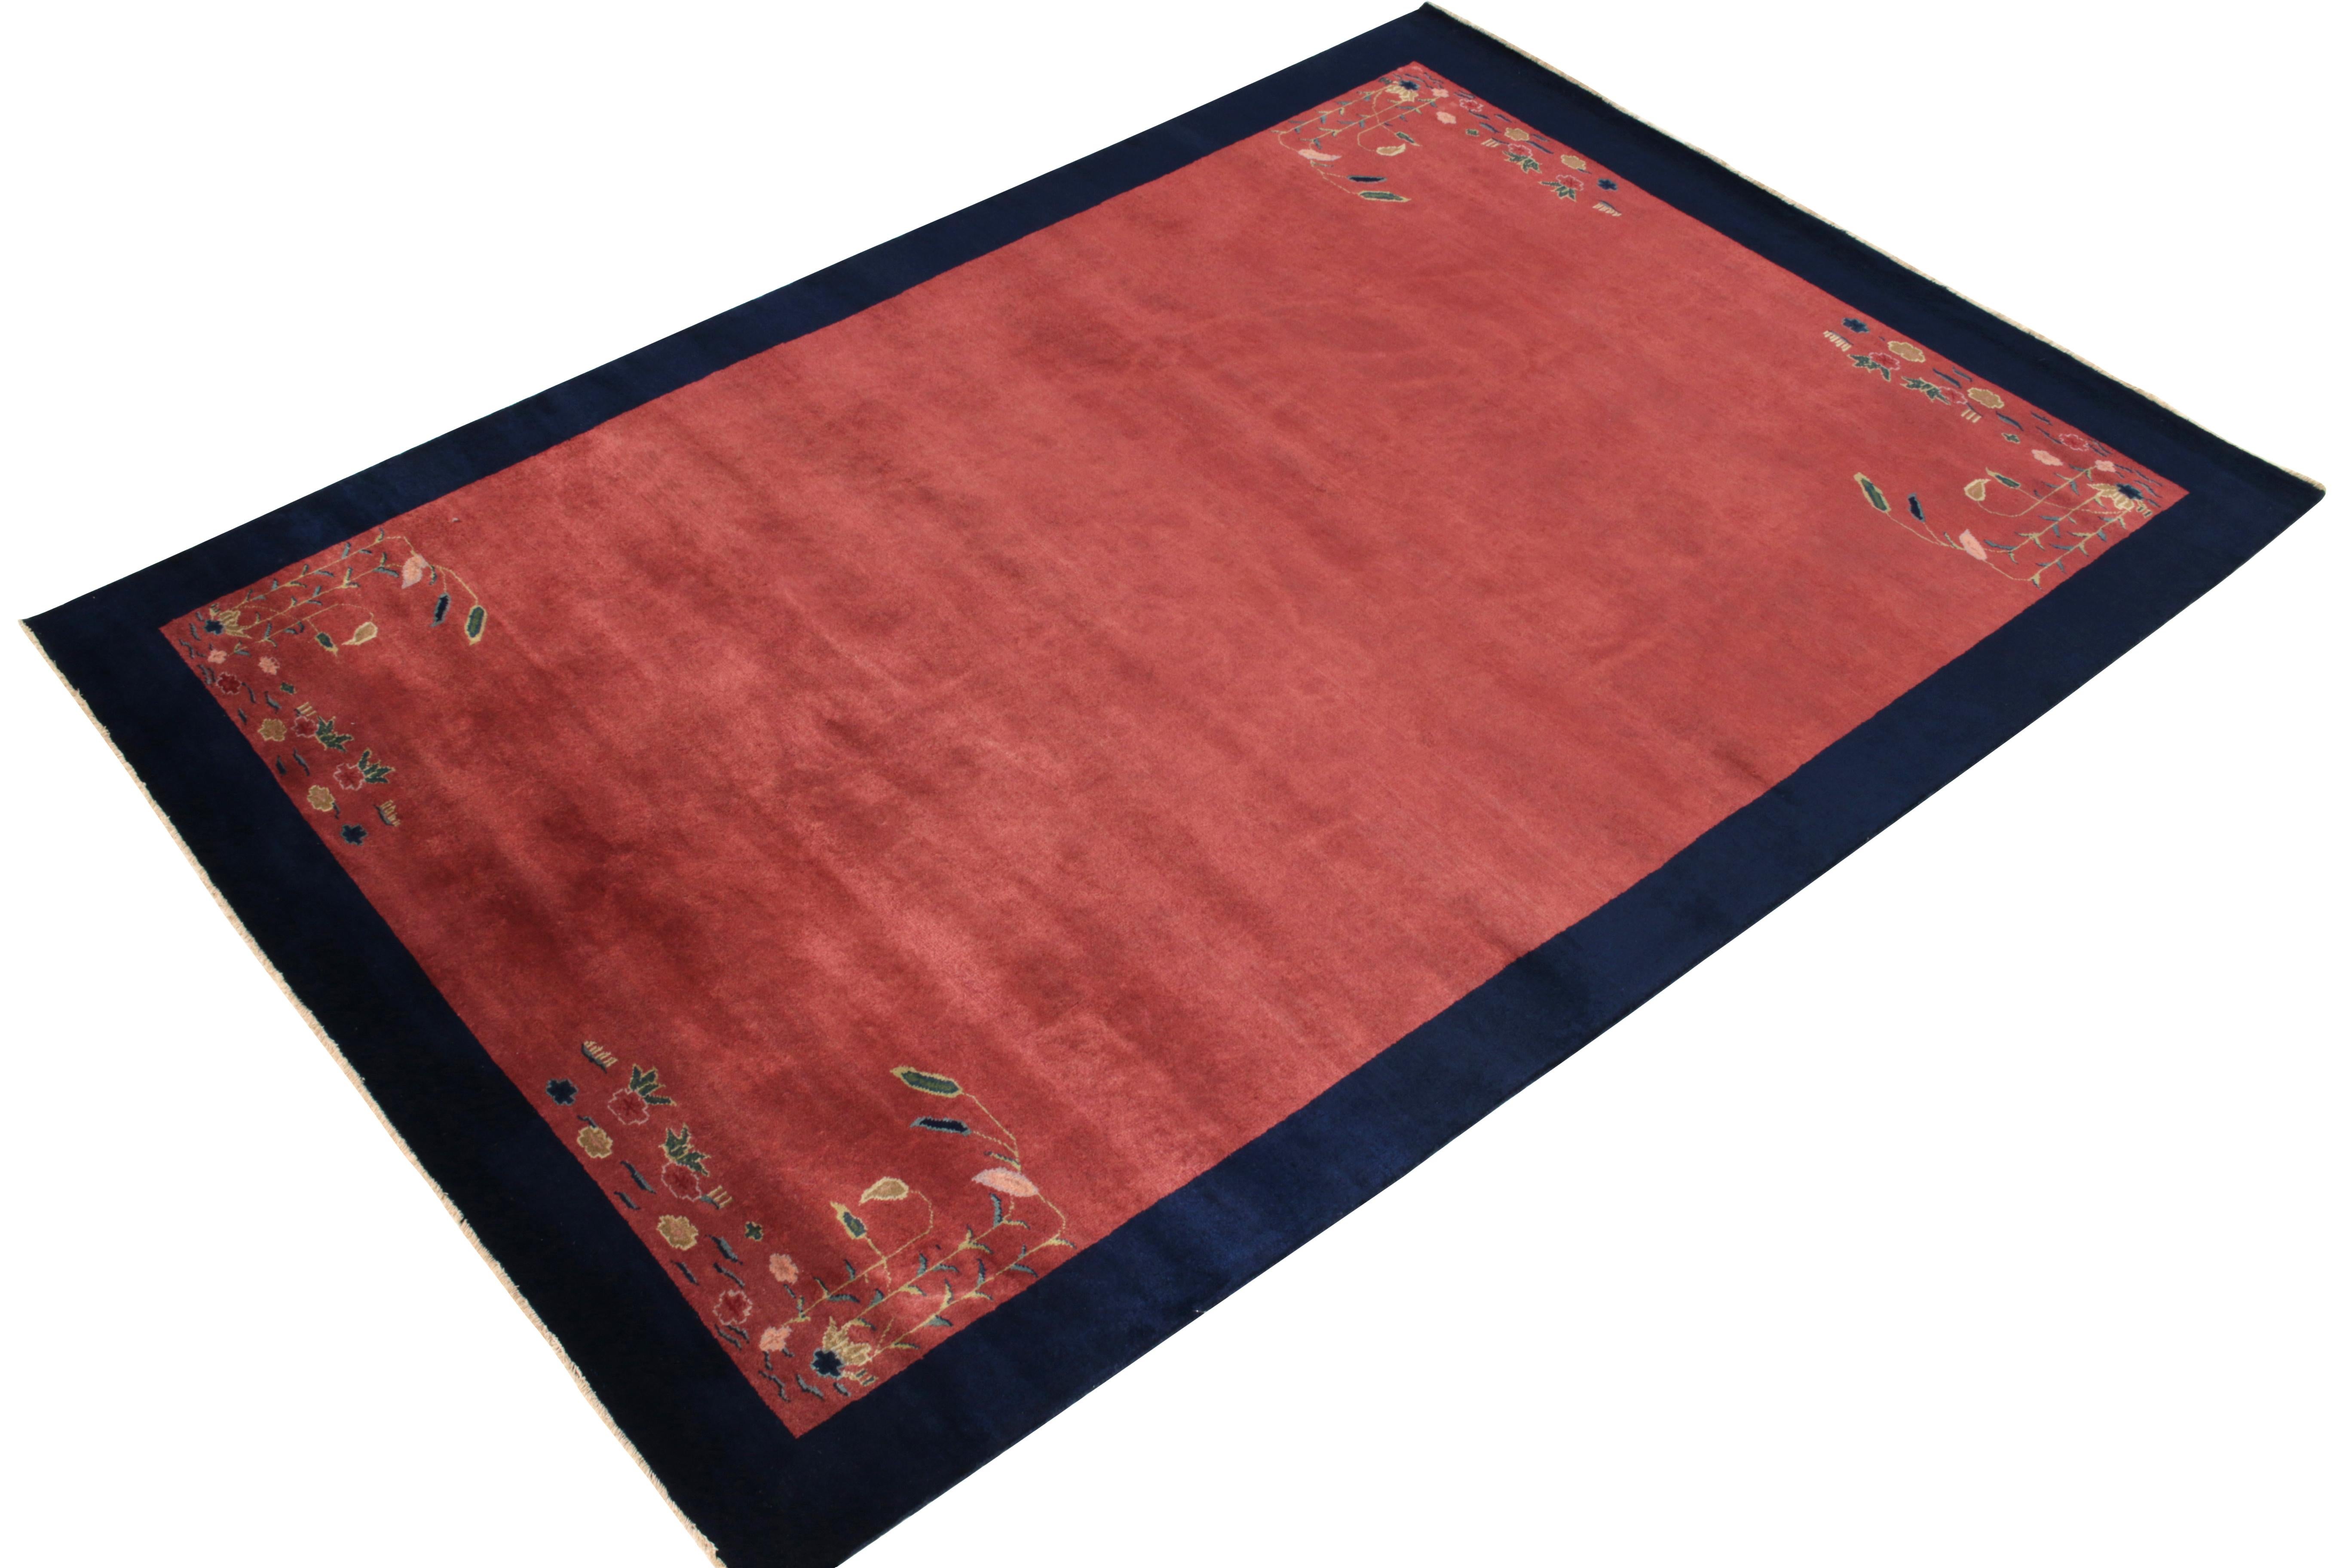 Art Deco Vintage Chinese Deco Style Rug in Coral Red, Blue Floral Pattern by Rug & Kilim For Sale